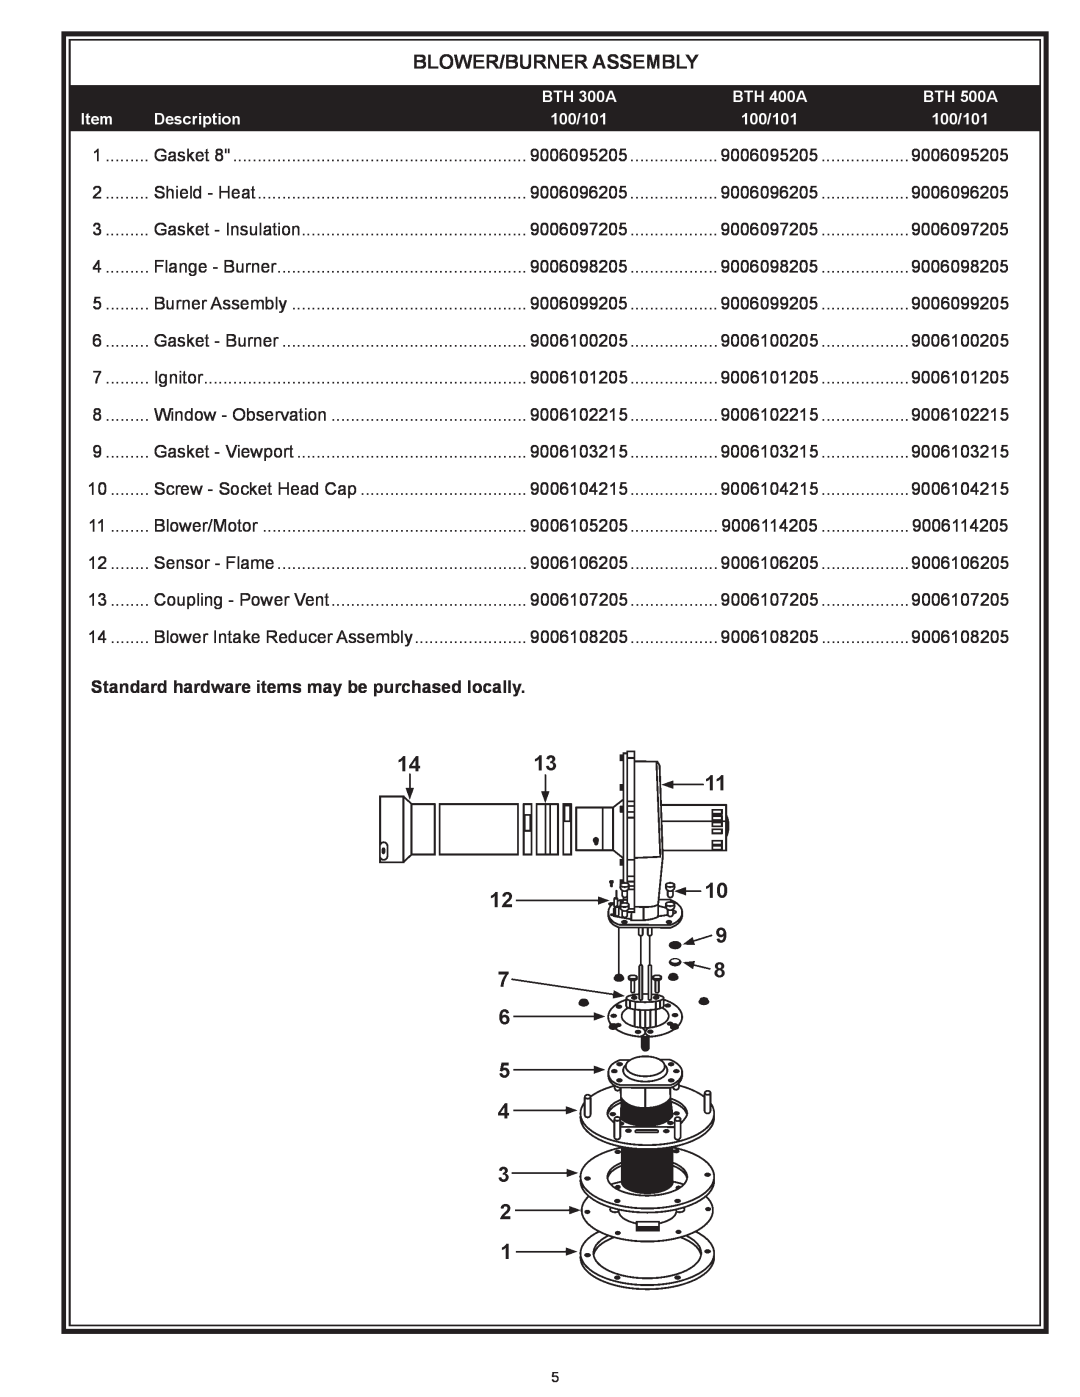 A.O. Smith BTH-500A manual Blower/Burner Assembly, Standard hardware items may be purchased locally 